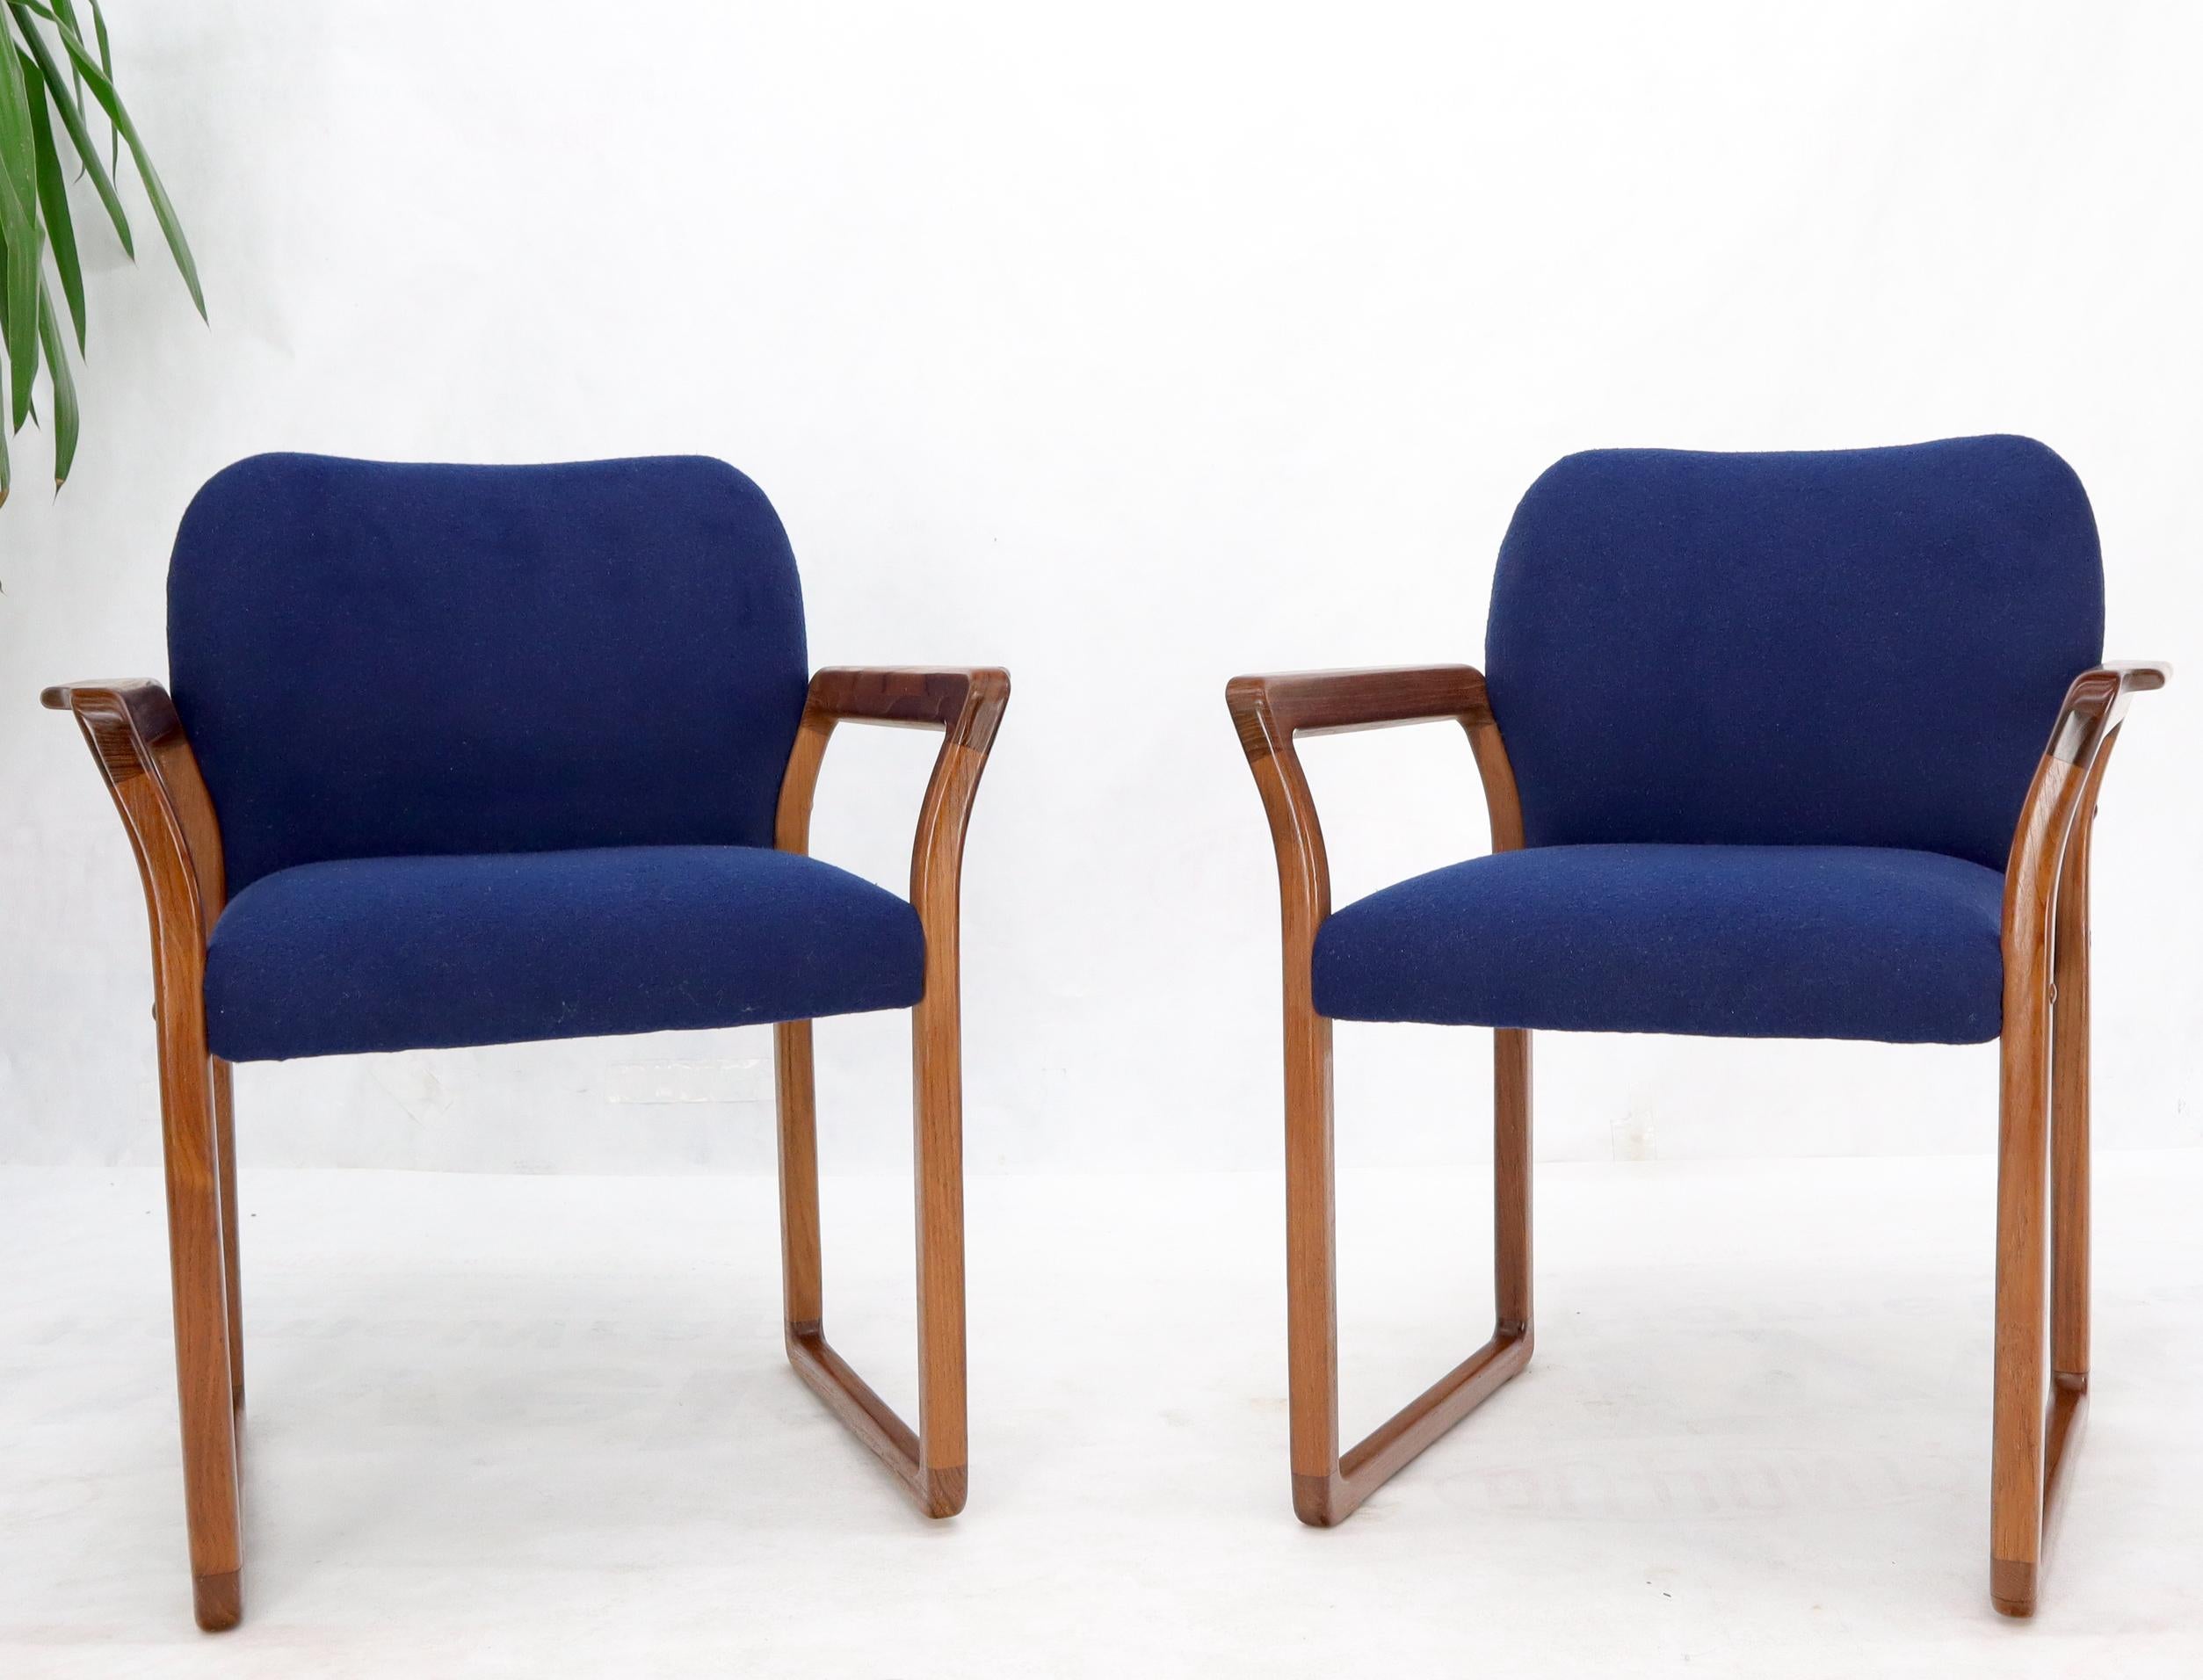 Pair of Danish Mid-Century Modern Teak Arms Chairs New Wool Upholstery For Sale 3